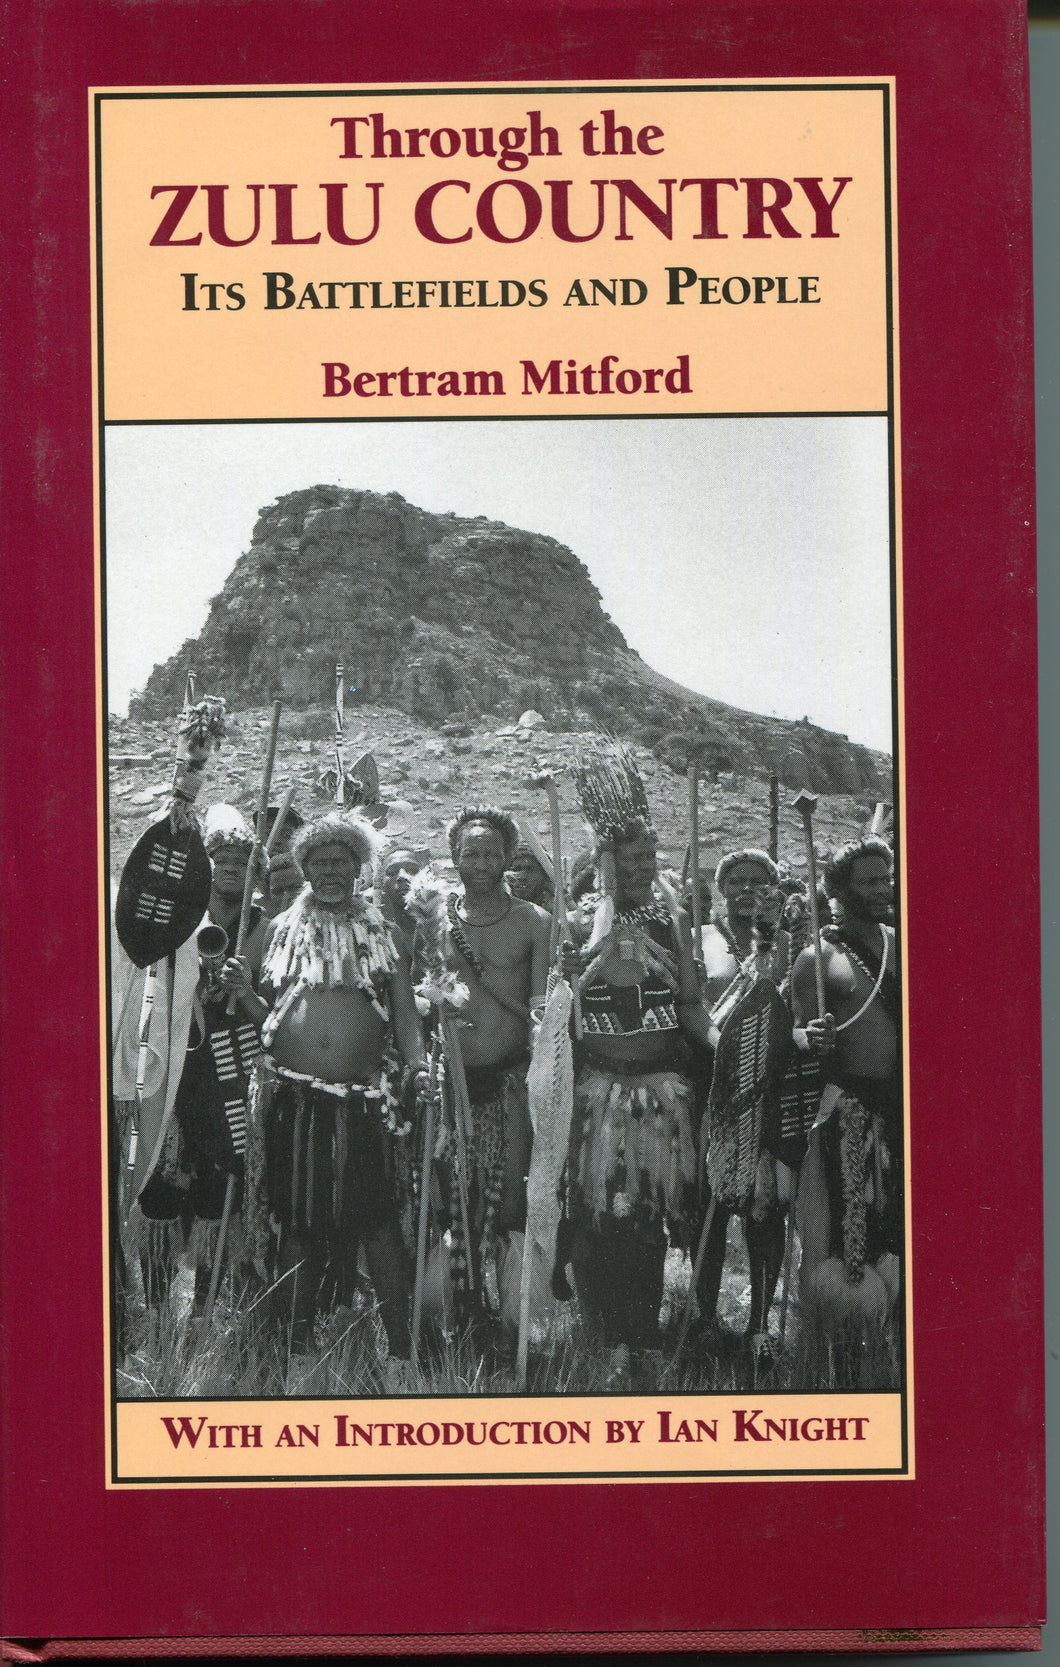 ‘Through The Zulu Country; Its Battlefields and Its People’ By Bertram Mitford, Introduction by Ian Knight